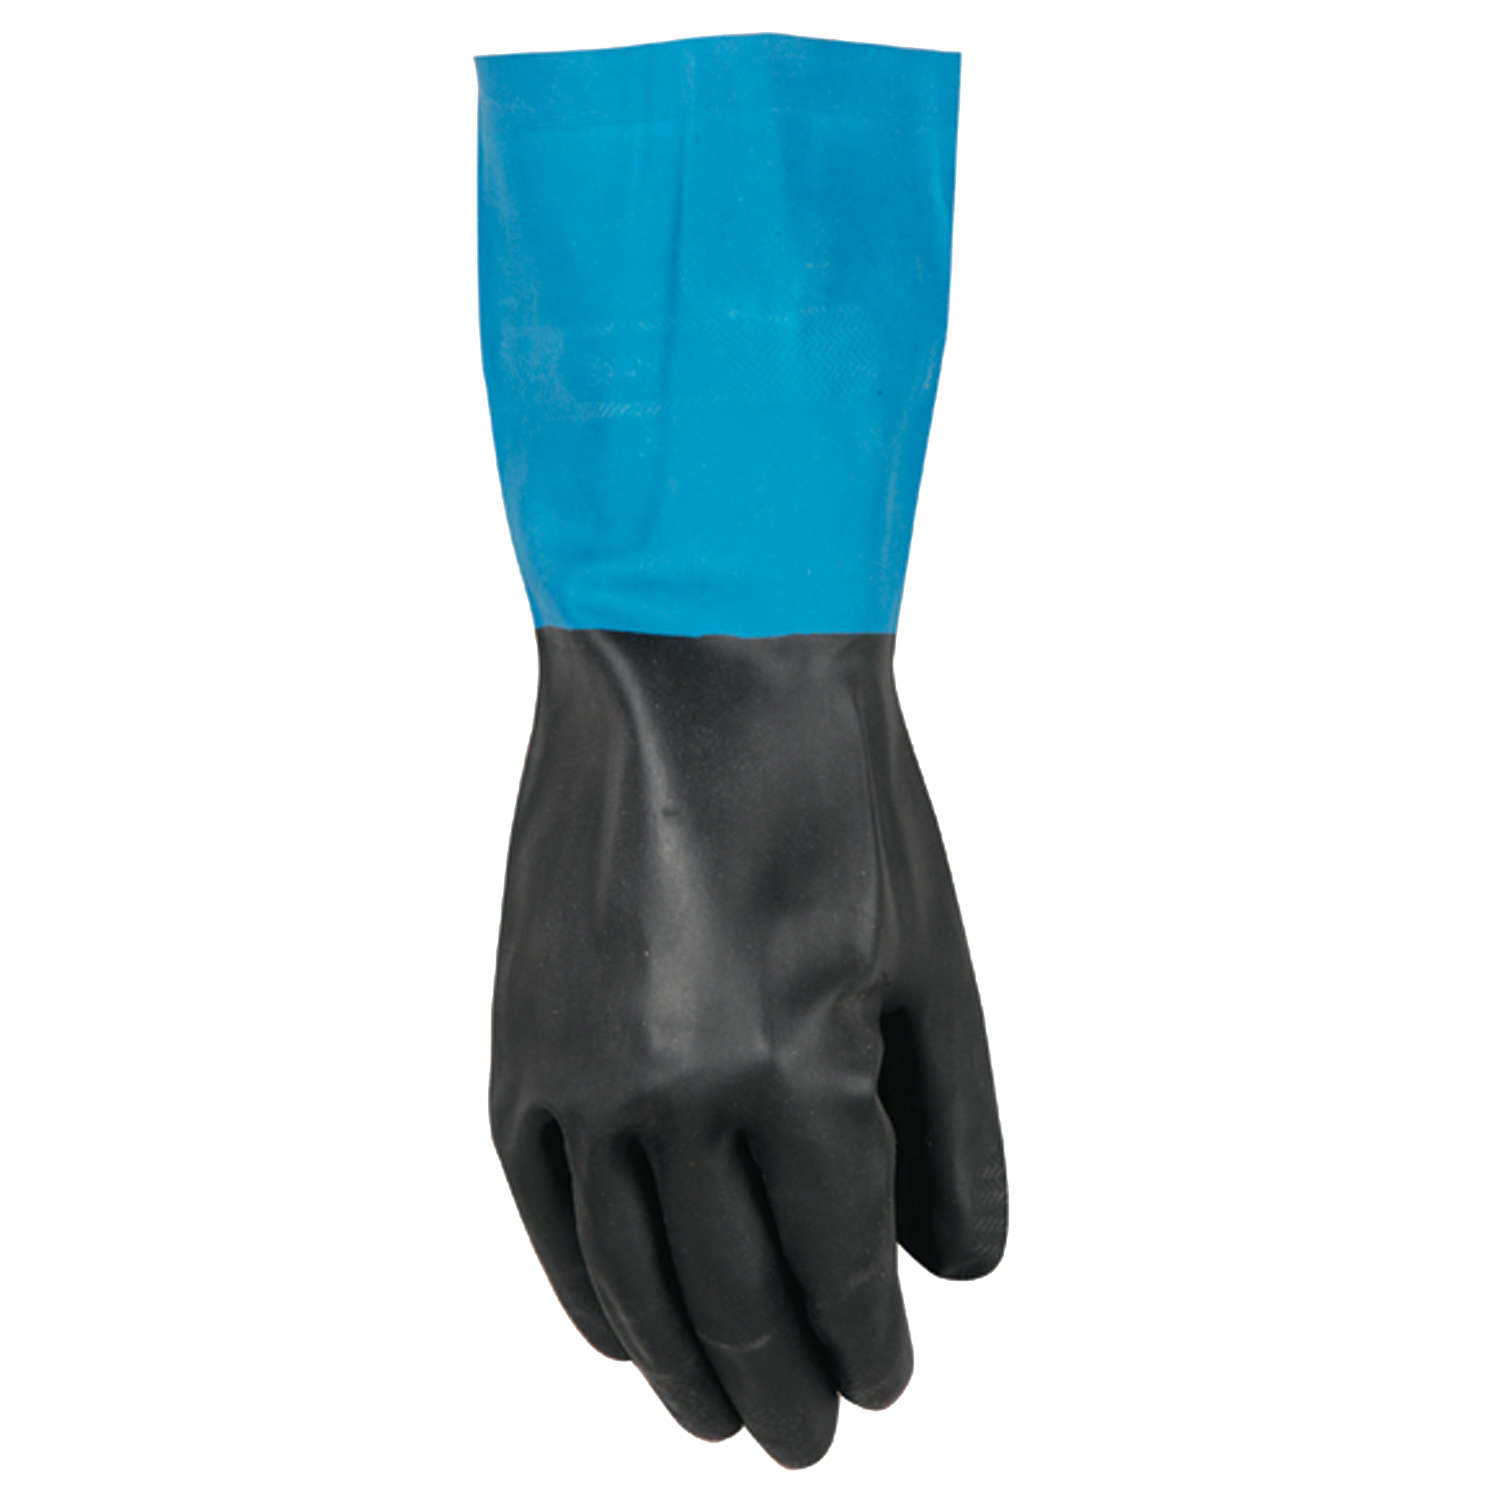 Wells Lamont Work Gloves with Gauntlet Cuff,Neoprene Overdip Coated,Large 191L 